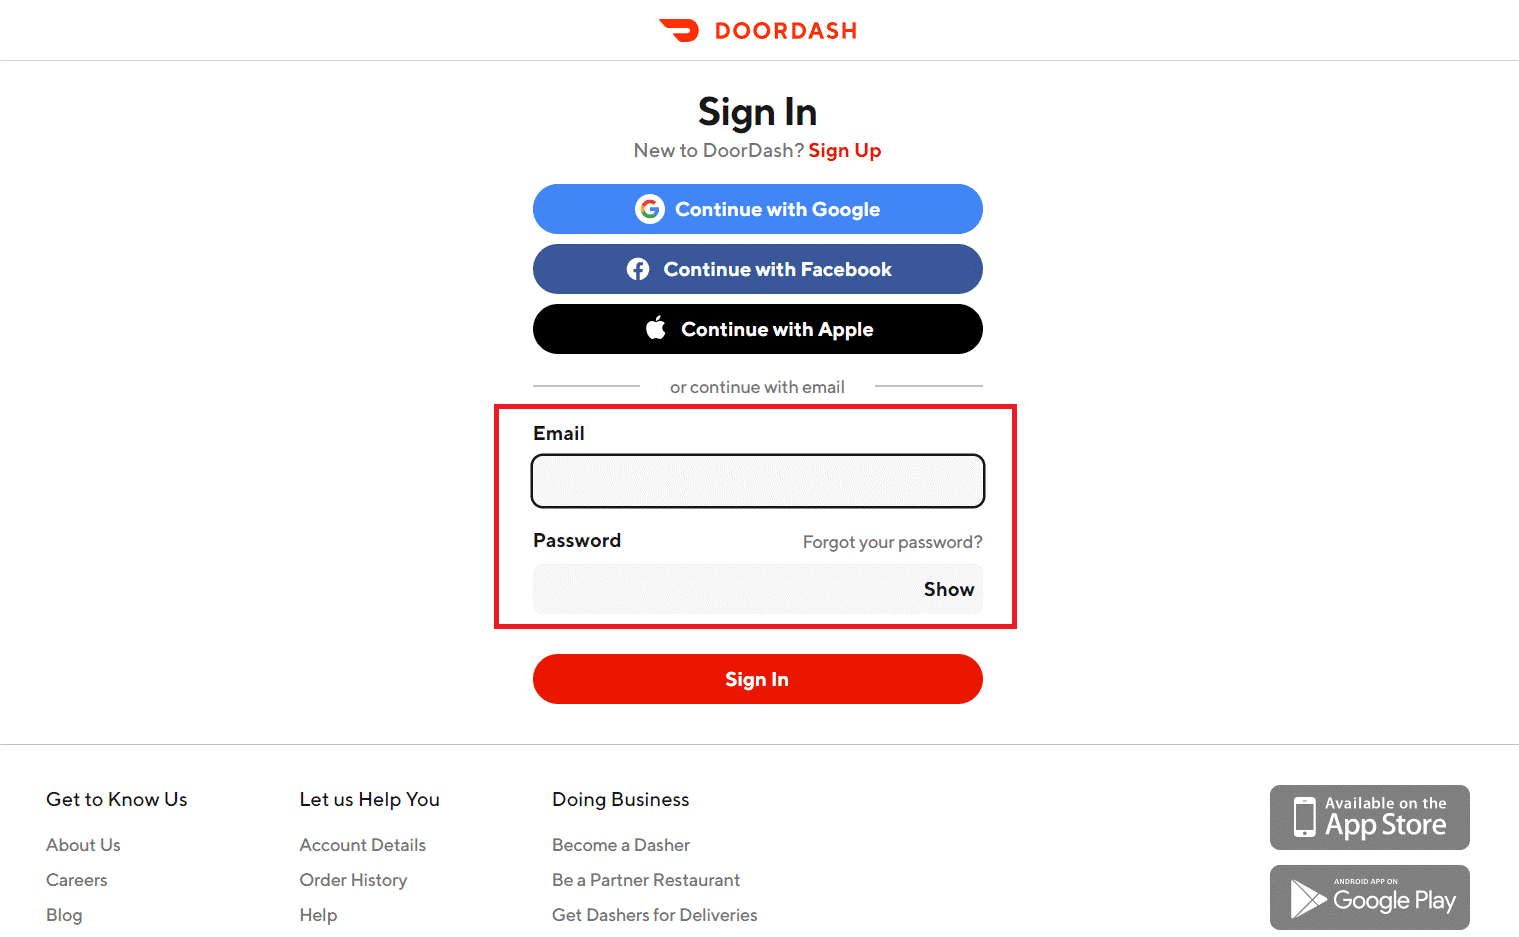 Log in to your account using your login credentials